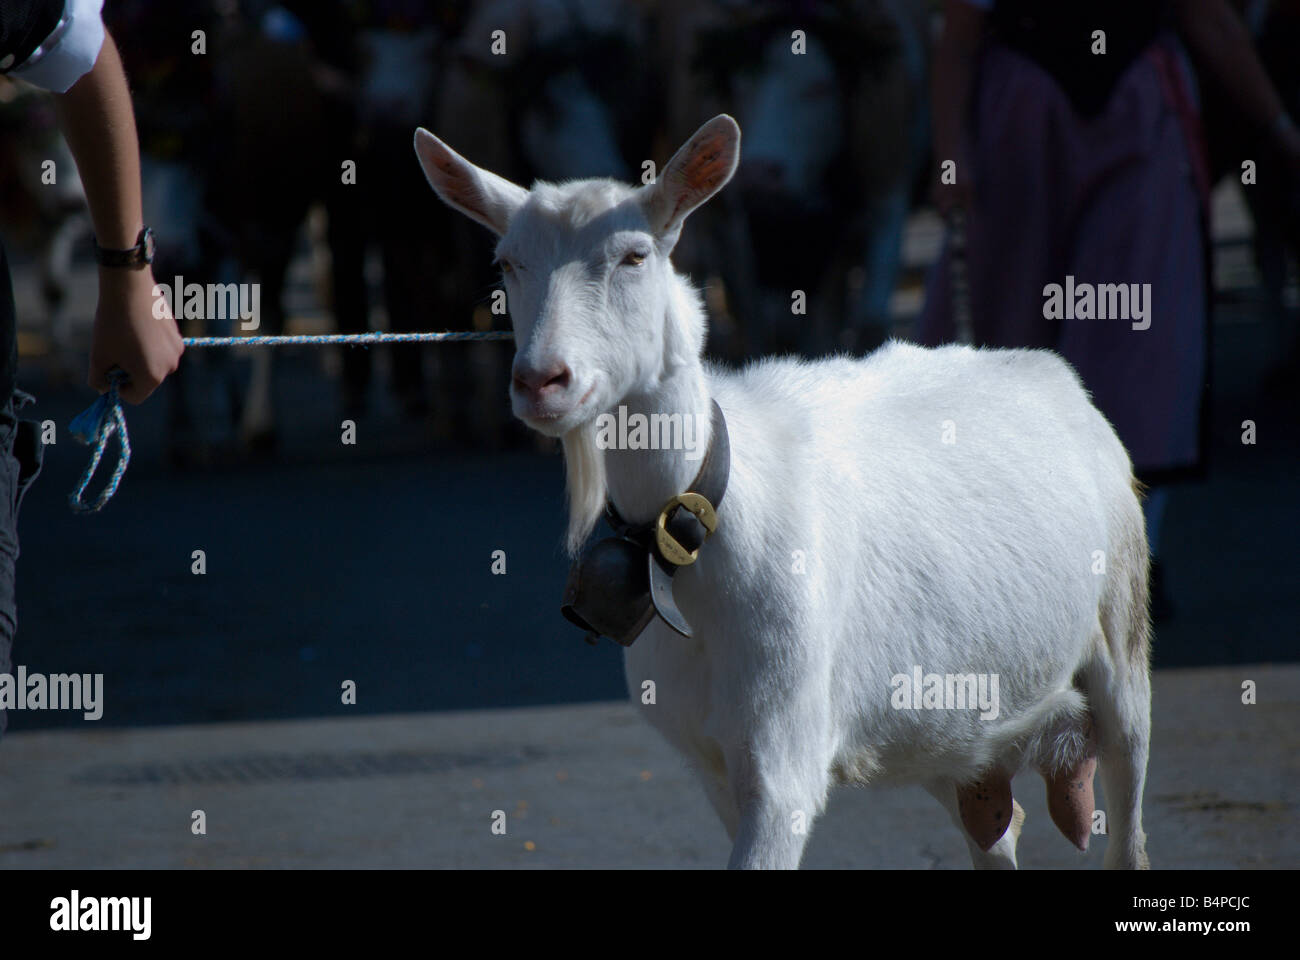 A goat takes part in the annual Alpenfest parade in Lenk, Switzerland. Stock Photo